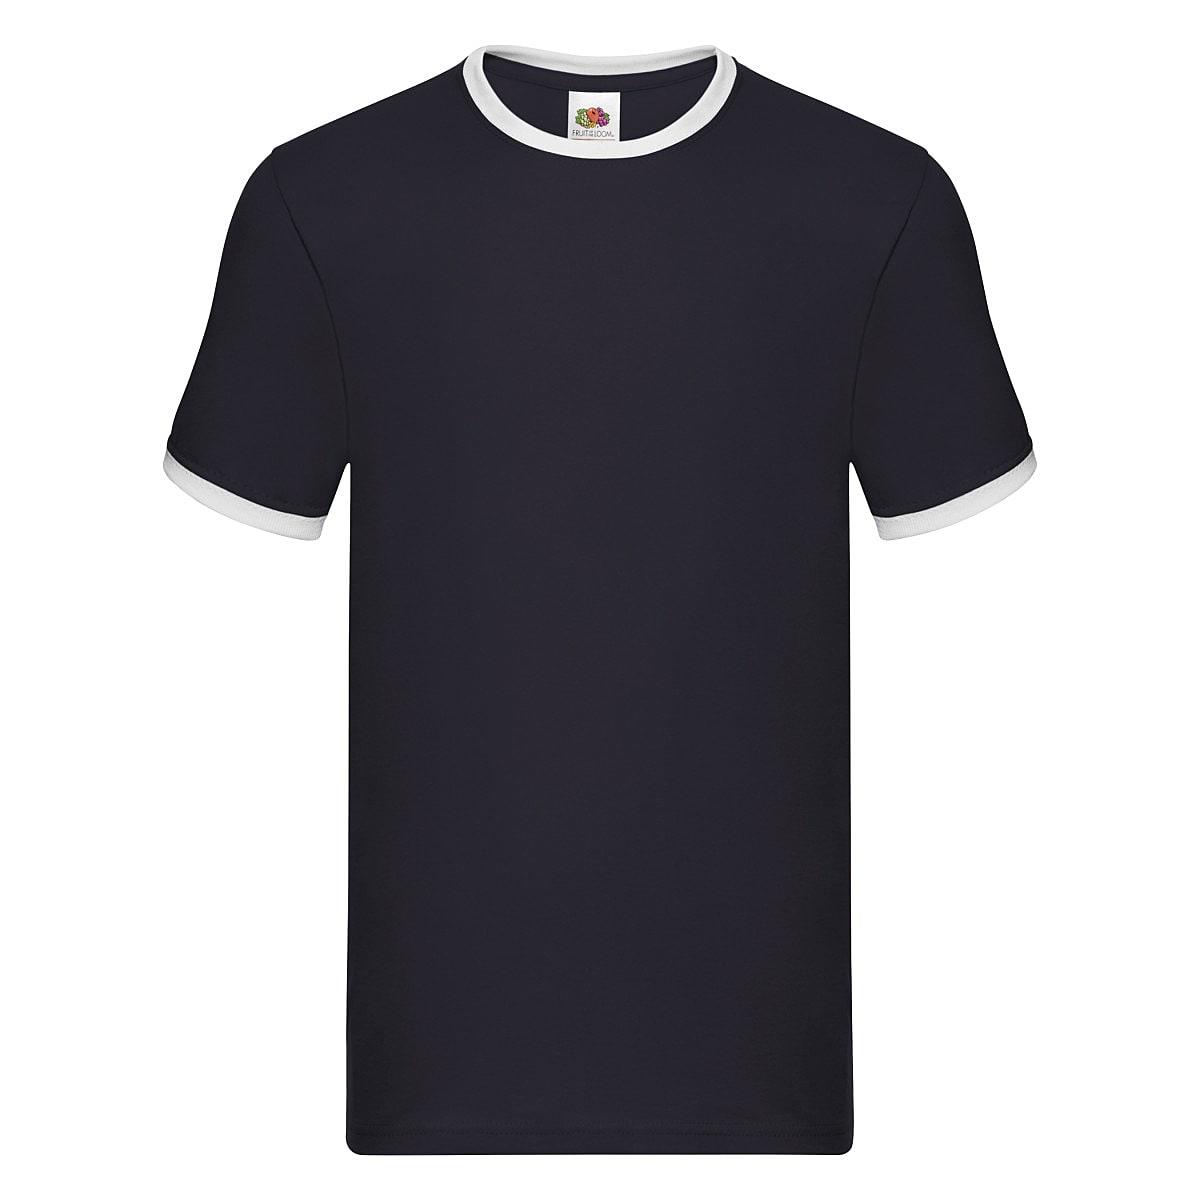 Fruit Of The Loom Ringer T-Shirt in Navy / White (Product Code: 61168)